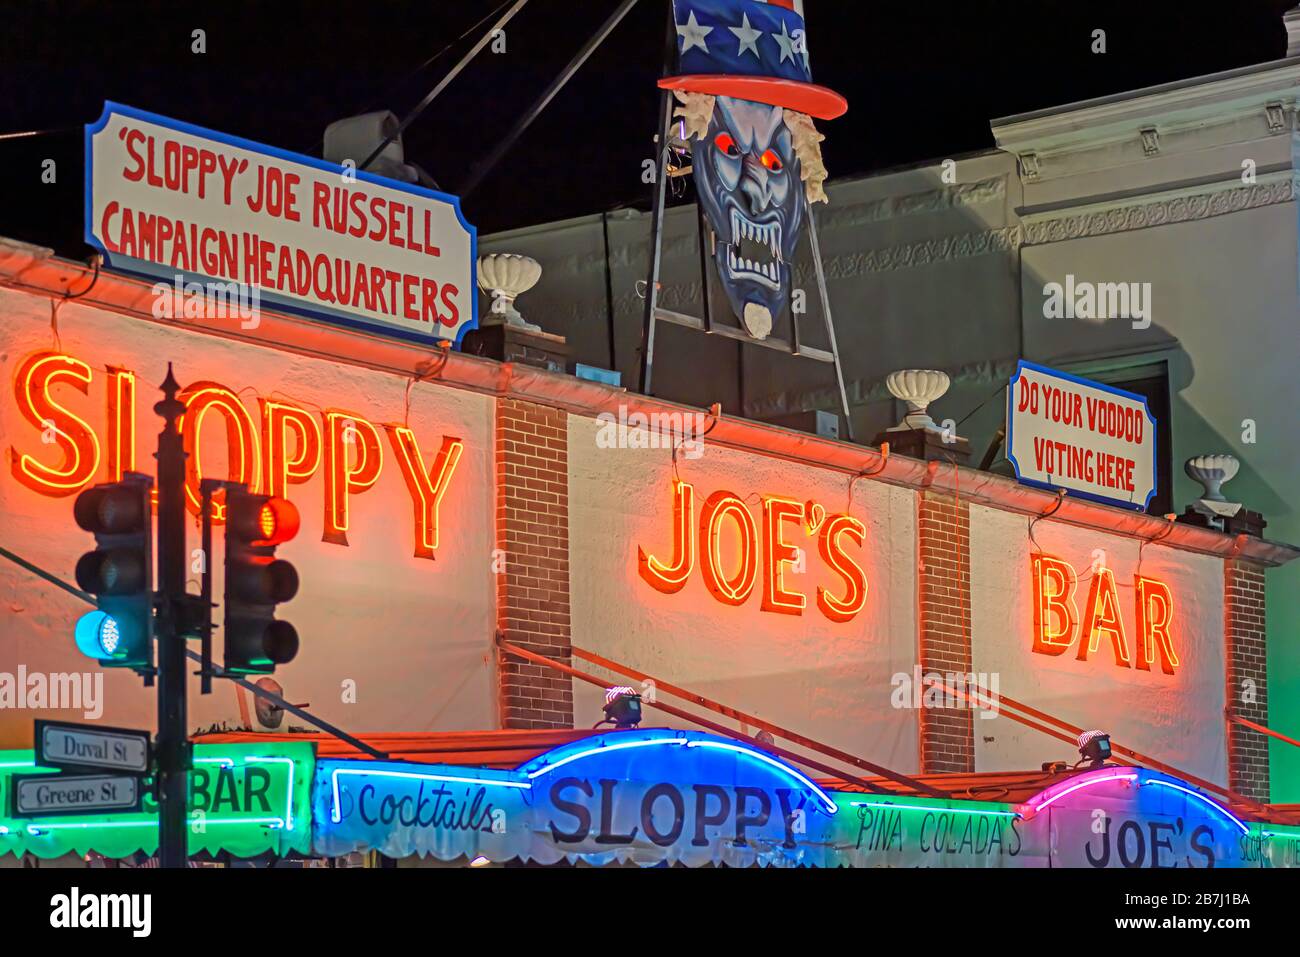 Key West Florida USA 10/25/2016 Night time photo of Slopppy Joe's Bar on the corner of Duval St. and Greene St. Fantasy Fest and election year. Stock Photo